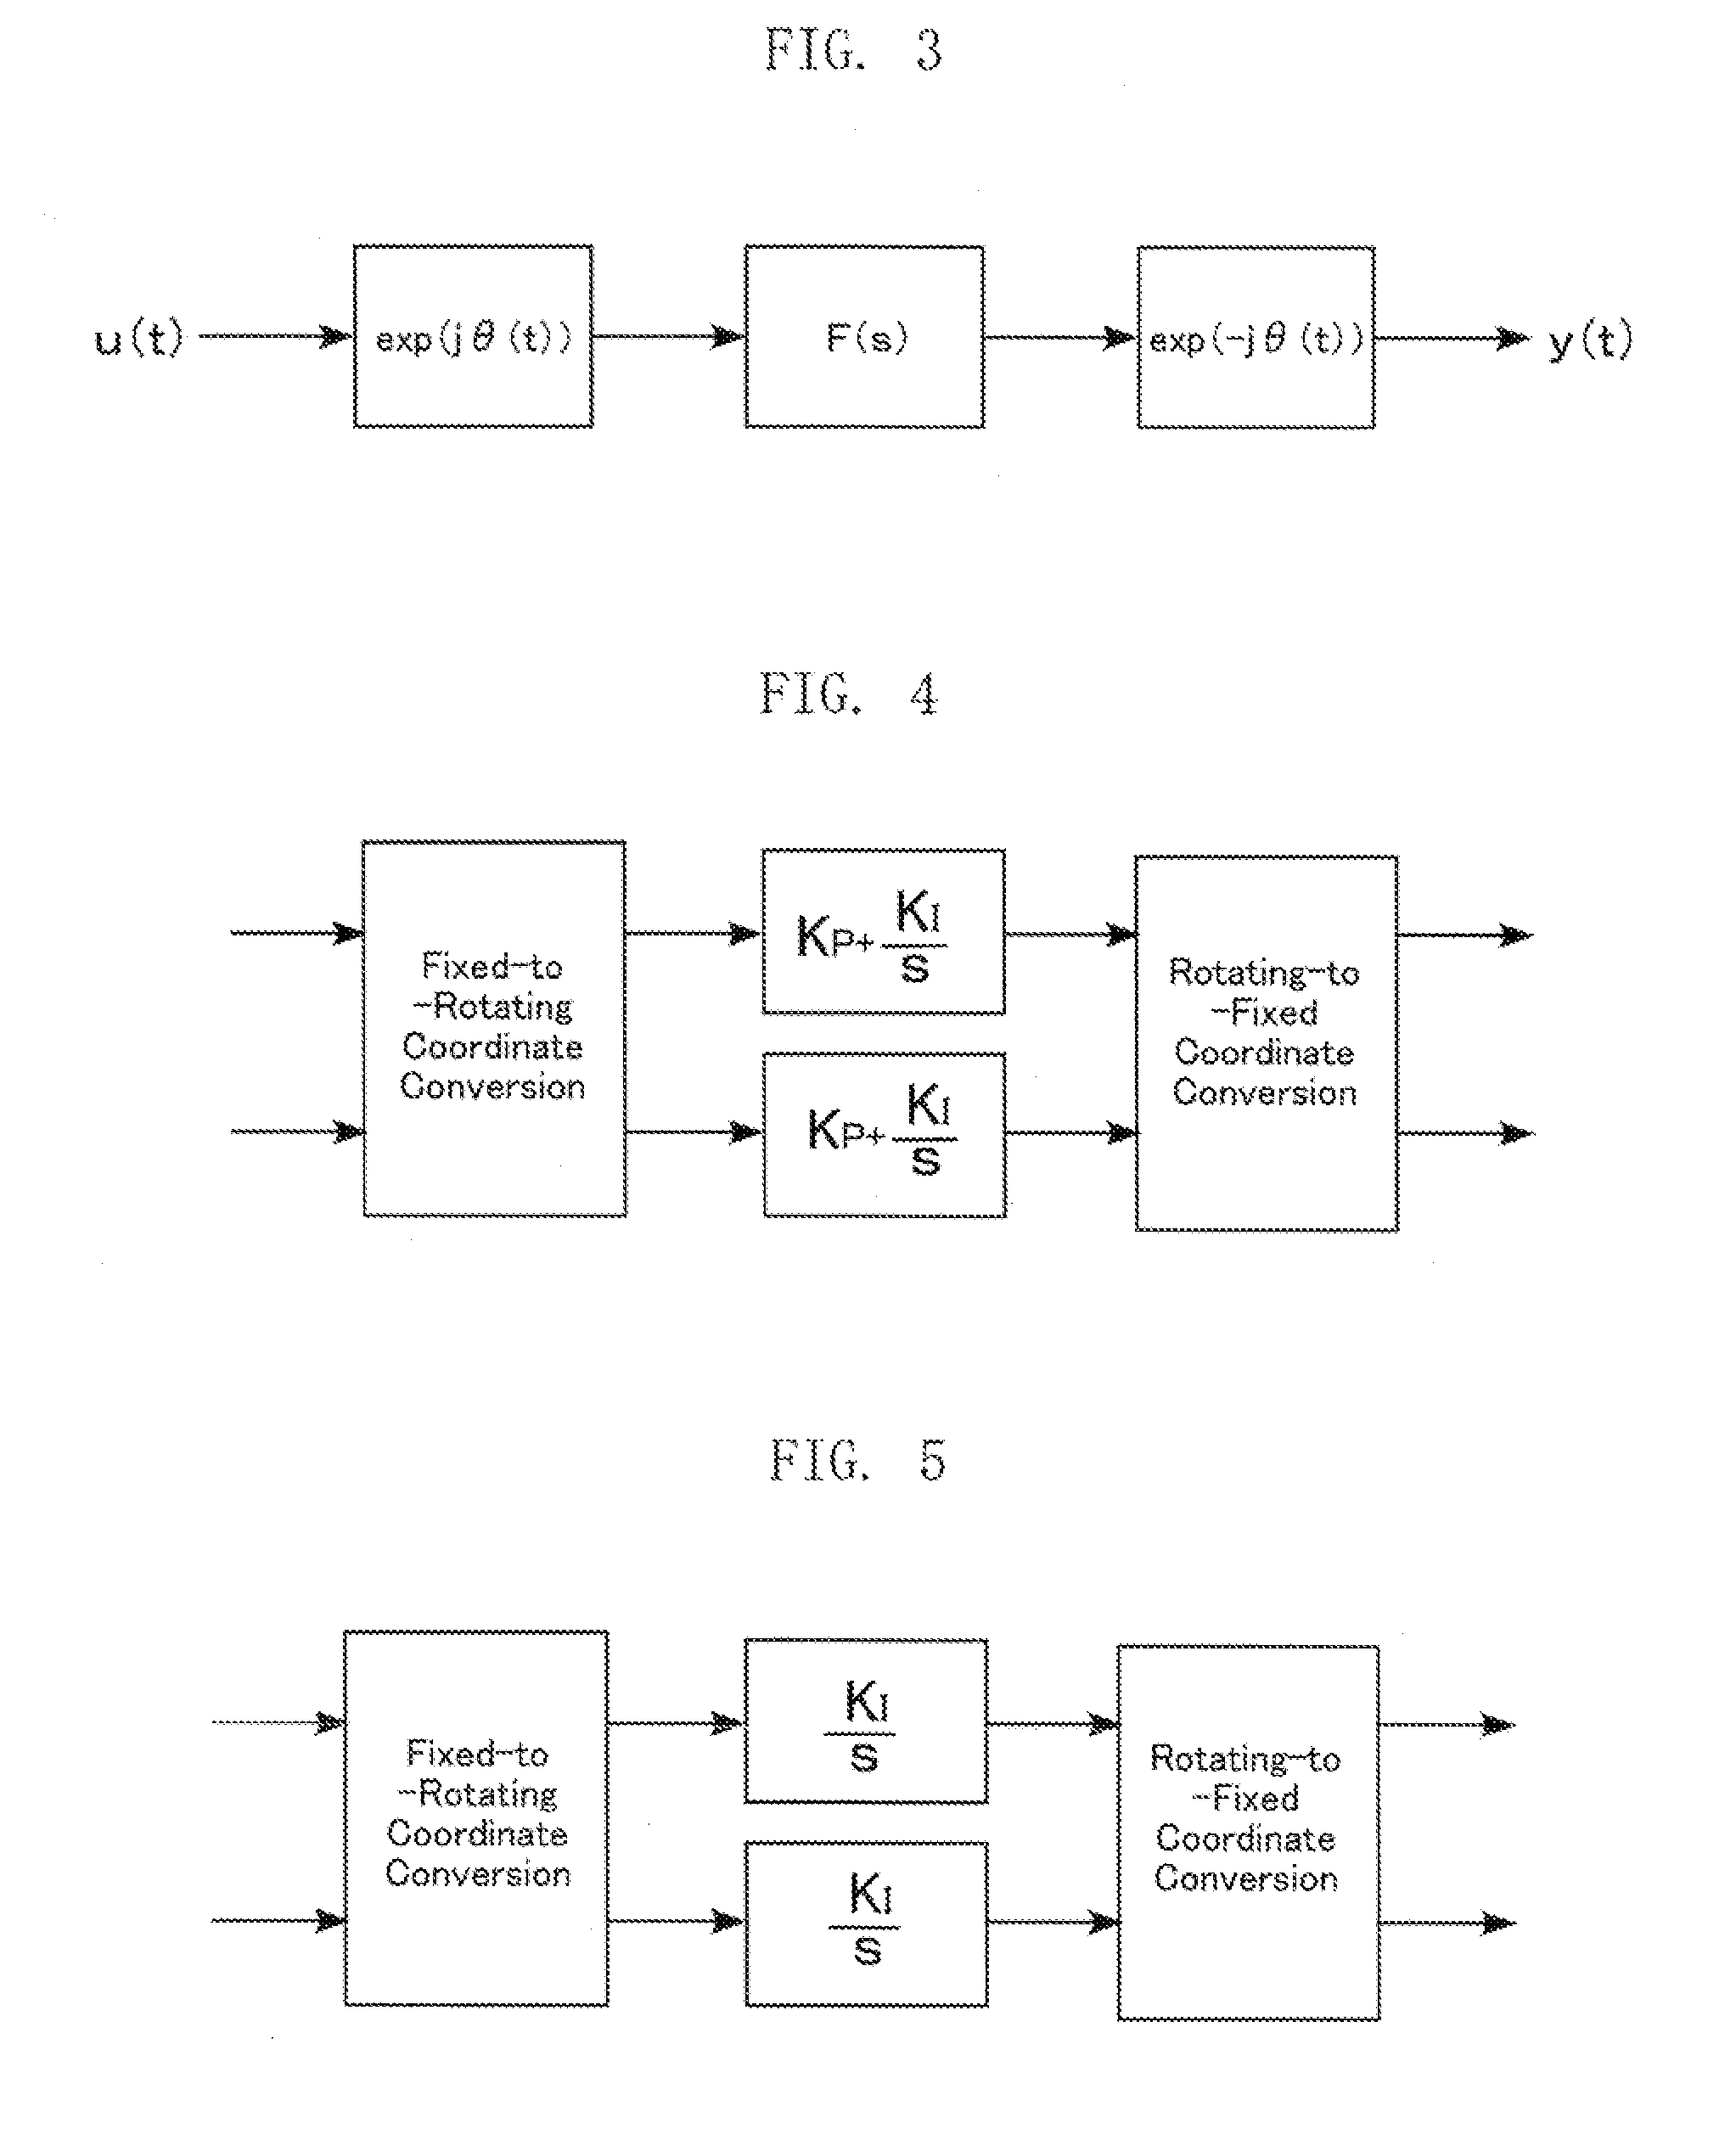 Signal processor, filter, control circuit for power converter circuit, interconnection inverter system and pwm converter system